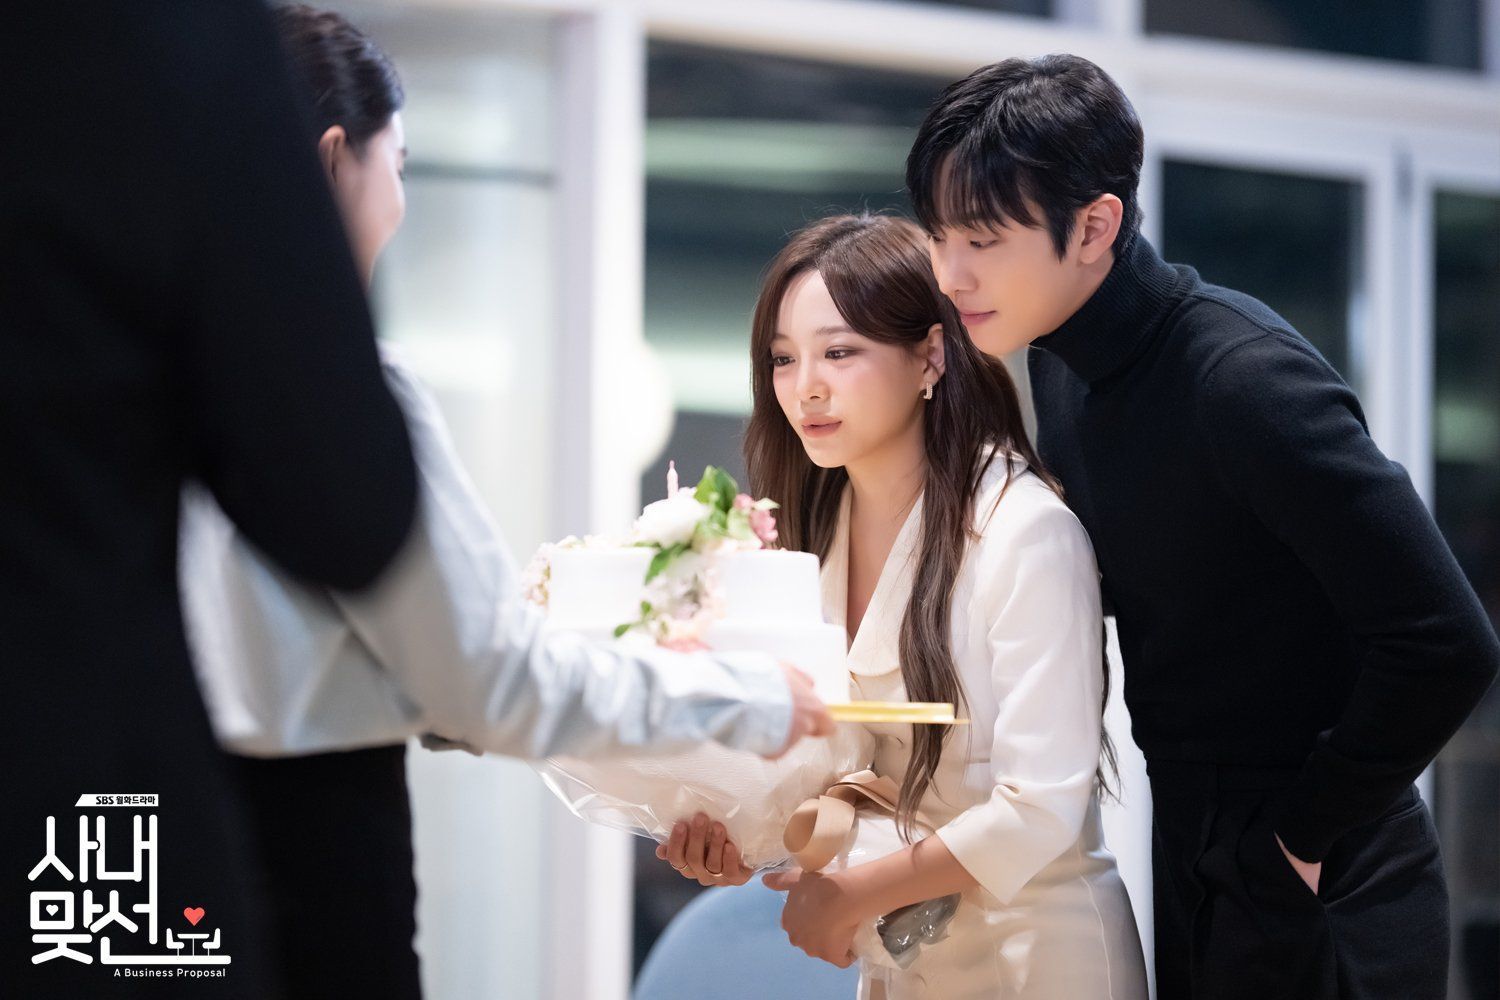 A Business Proposal: A Korean Drama About Love and Business